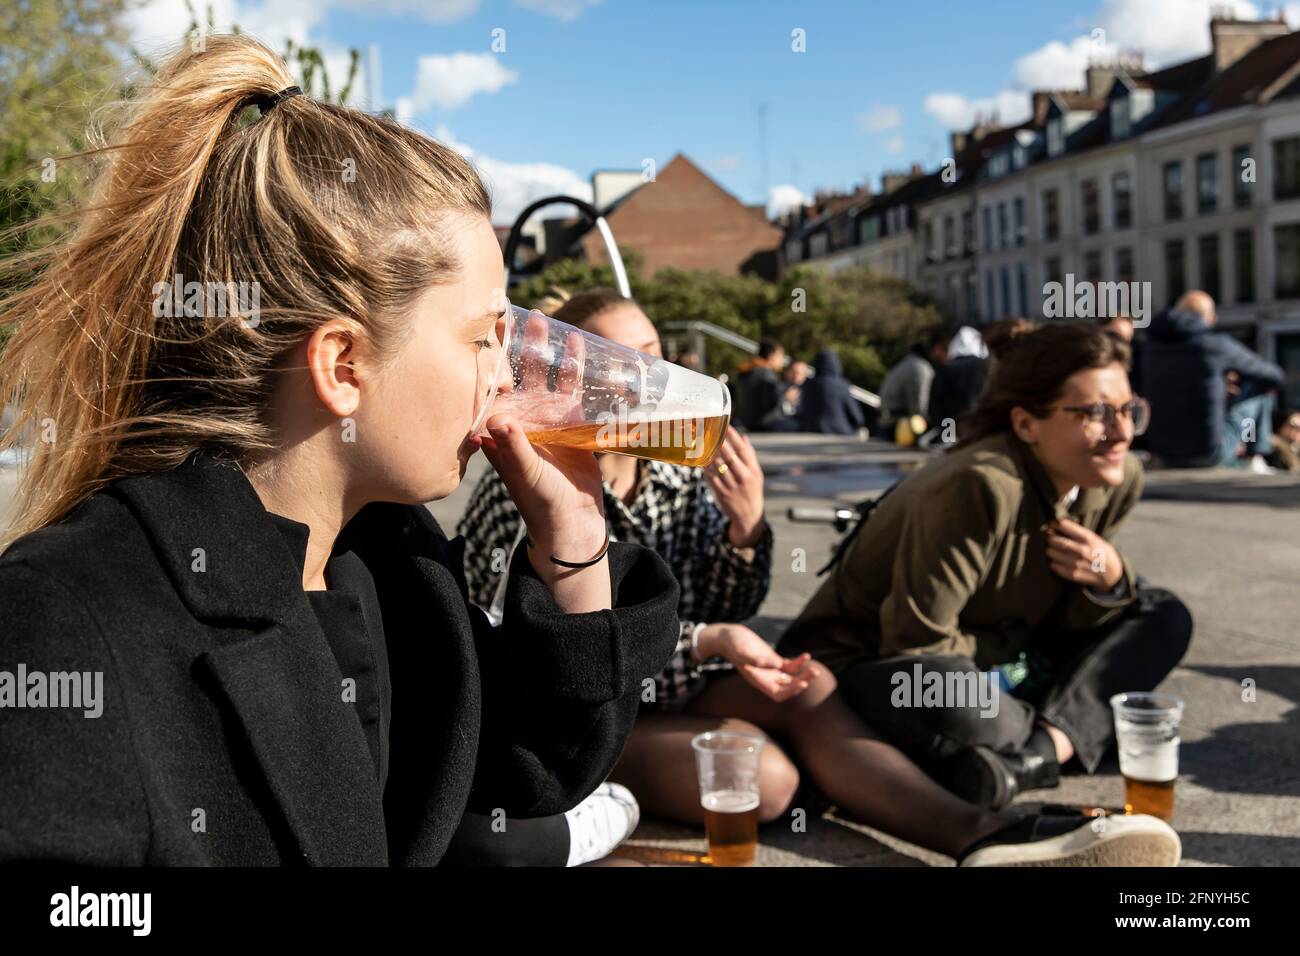 Lille, France. 19th May, 2021. People drink and chat in Lille, northern France, May 19, 2021. France on Wednesday took an important step forward towards returning to normality as people in the country can once again meet up in cafes or enjoy a meal in restaurants, which are now allowed to open their terraces. Credit: Sebastien Courdji/Xinhua/Alamy Live News Stock Photo